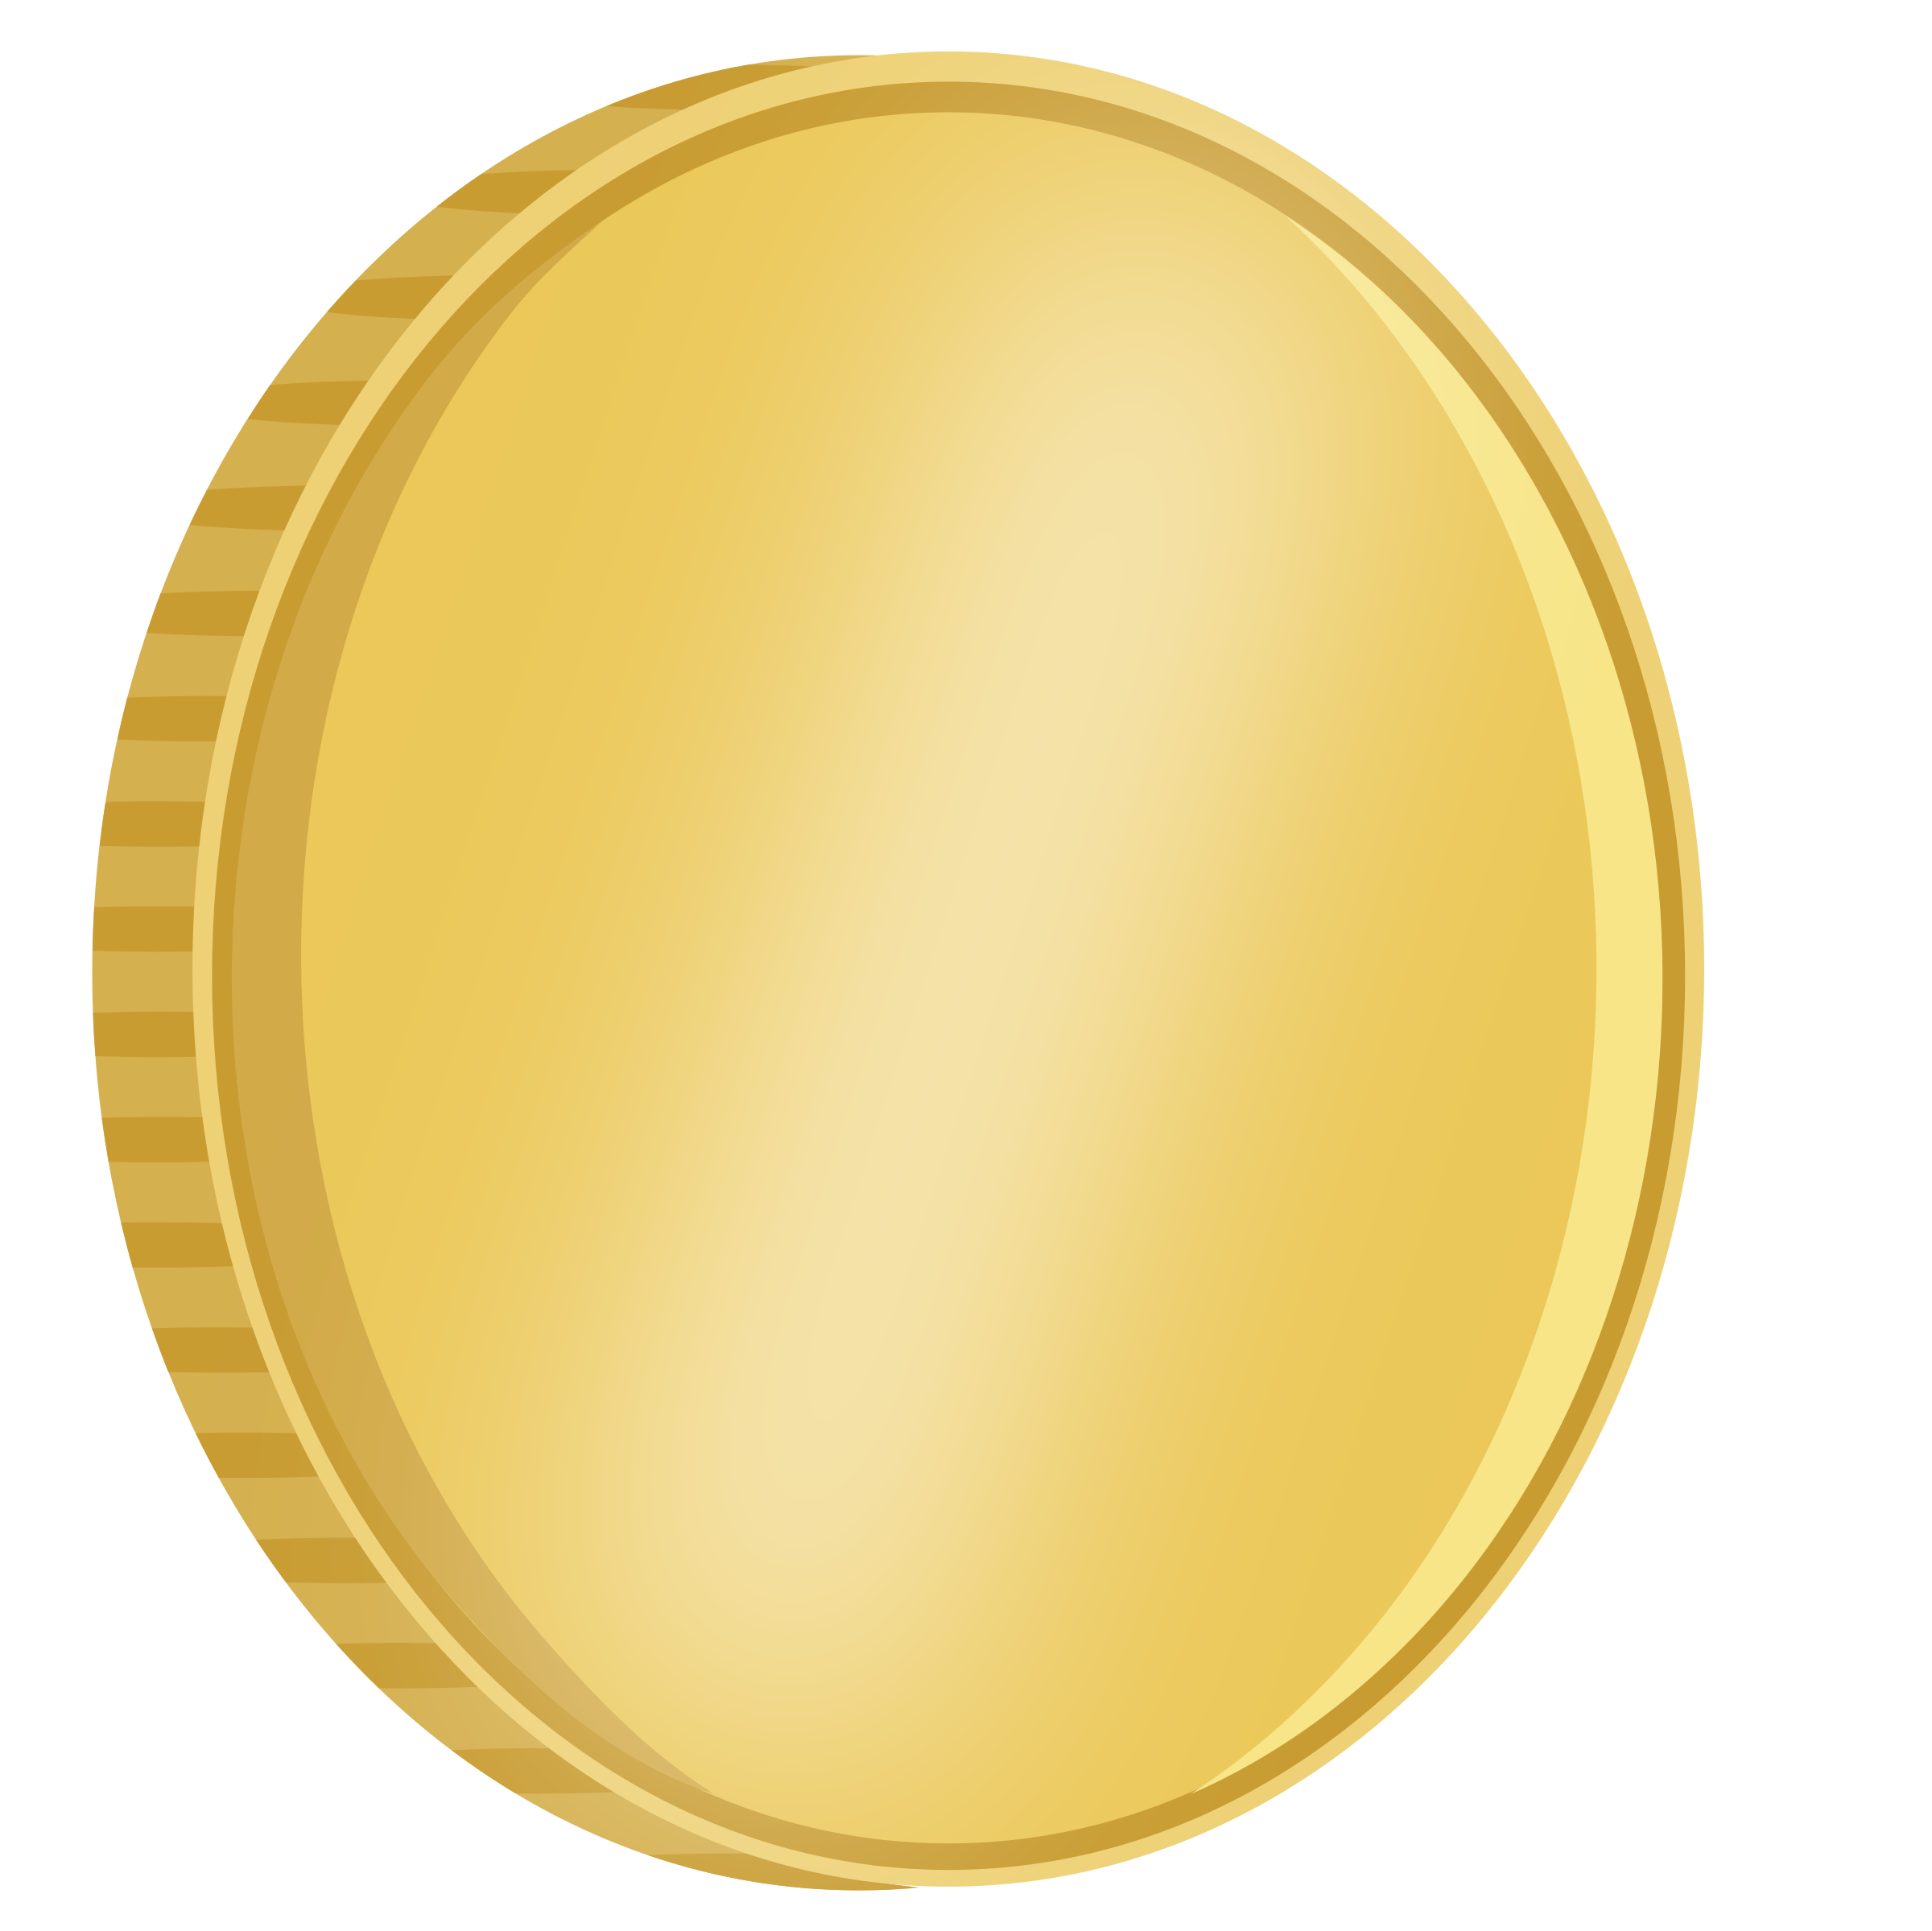 Gold Coin PNG Image Transparent Image Download Size X Px